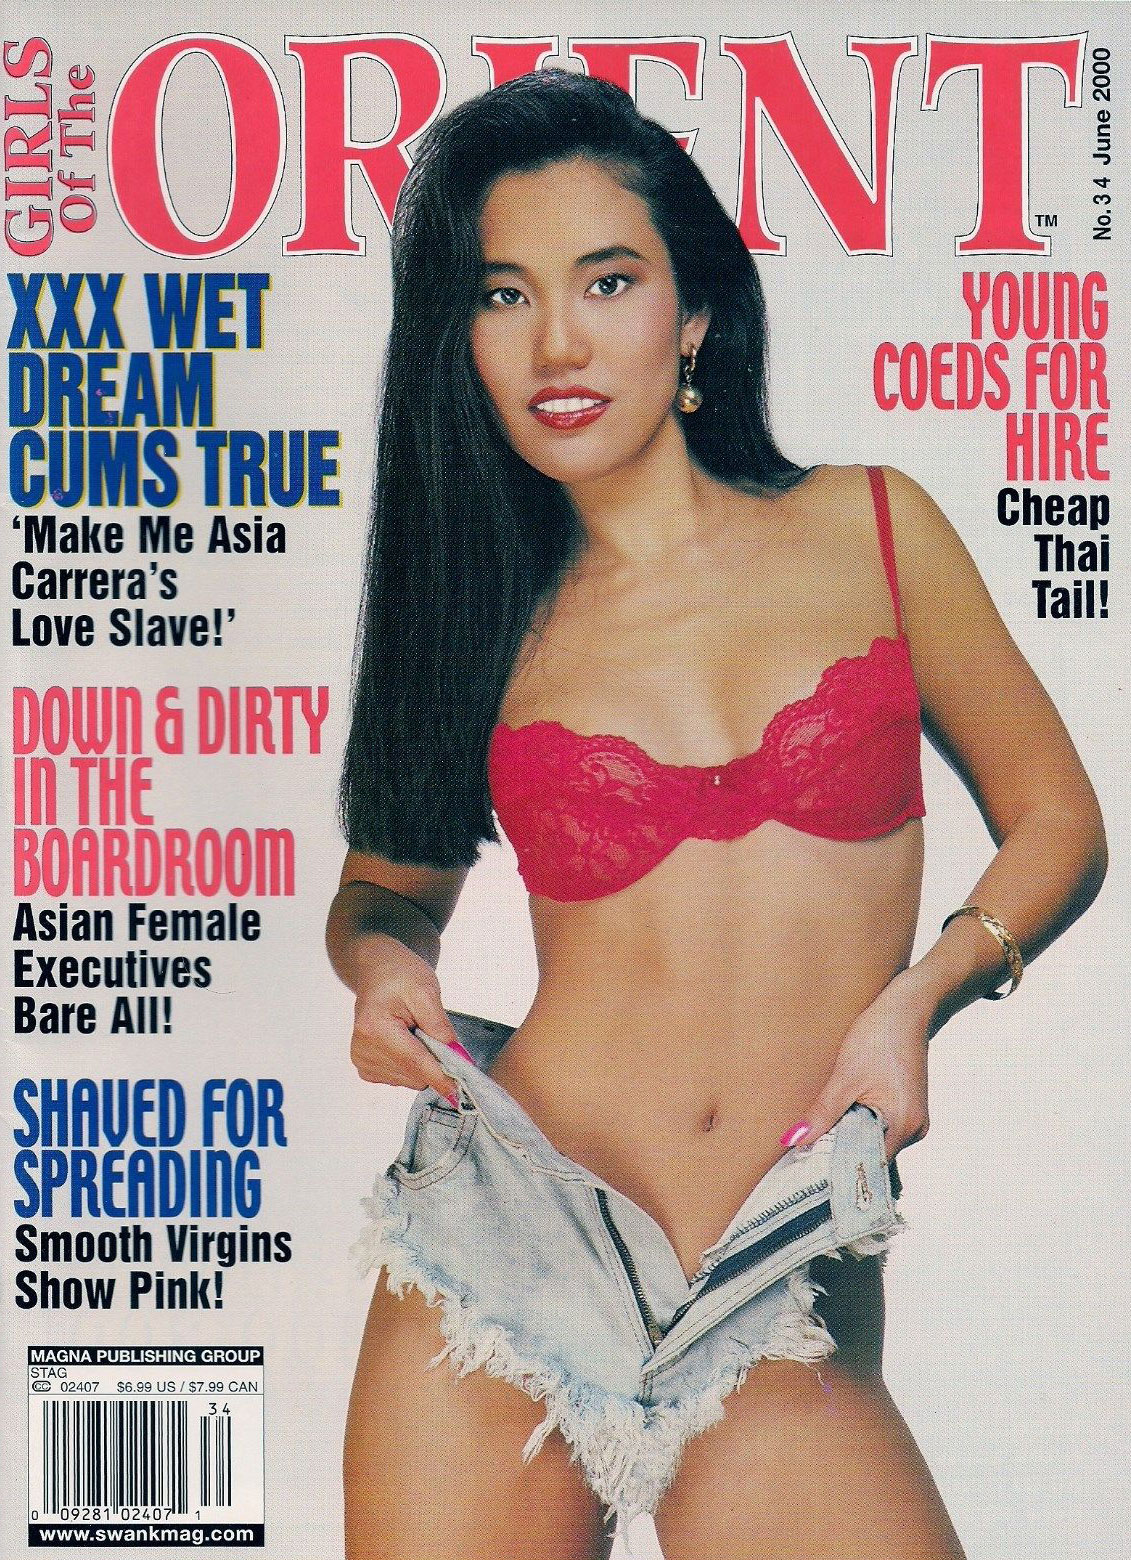 Stag # 34, June 2000 - Girls of the Orient magazine back issue Stag magizine back copy Stag # 34, June 2000 - Girls of the Orient Magazine for Men Adult Back Issue Published by Leeds Publishing Corp. XXX Wet Dream Cums True Make Me Asia Carrera's Love Slave!.